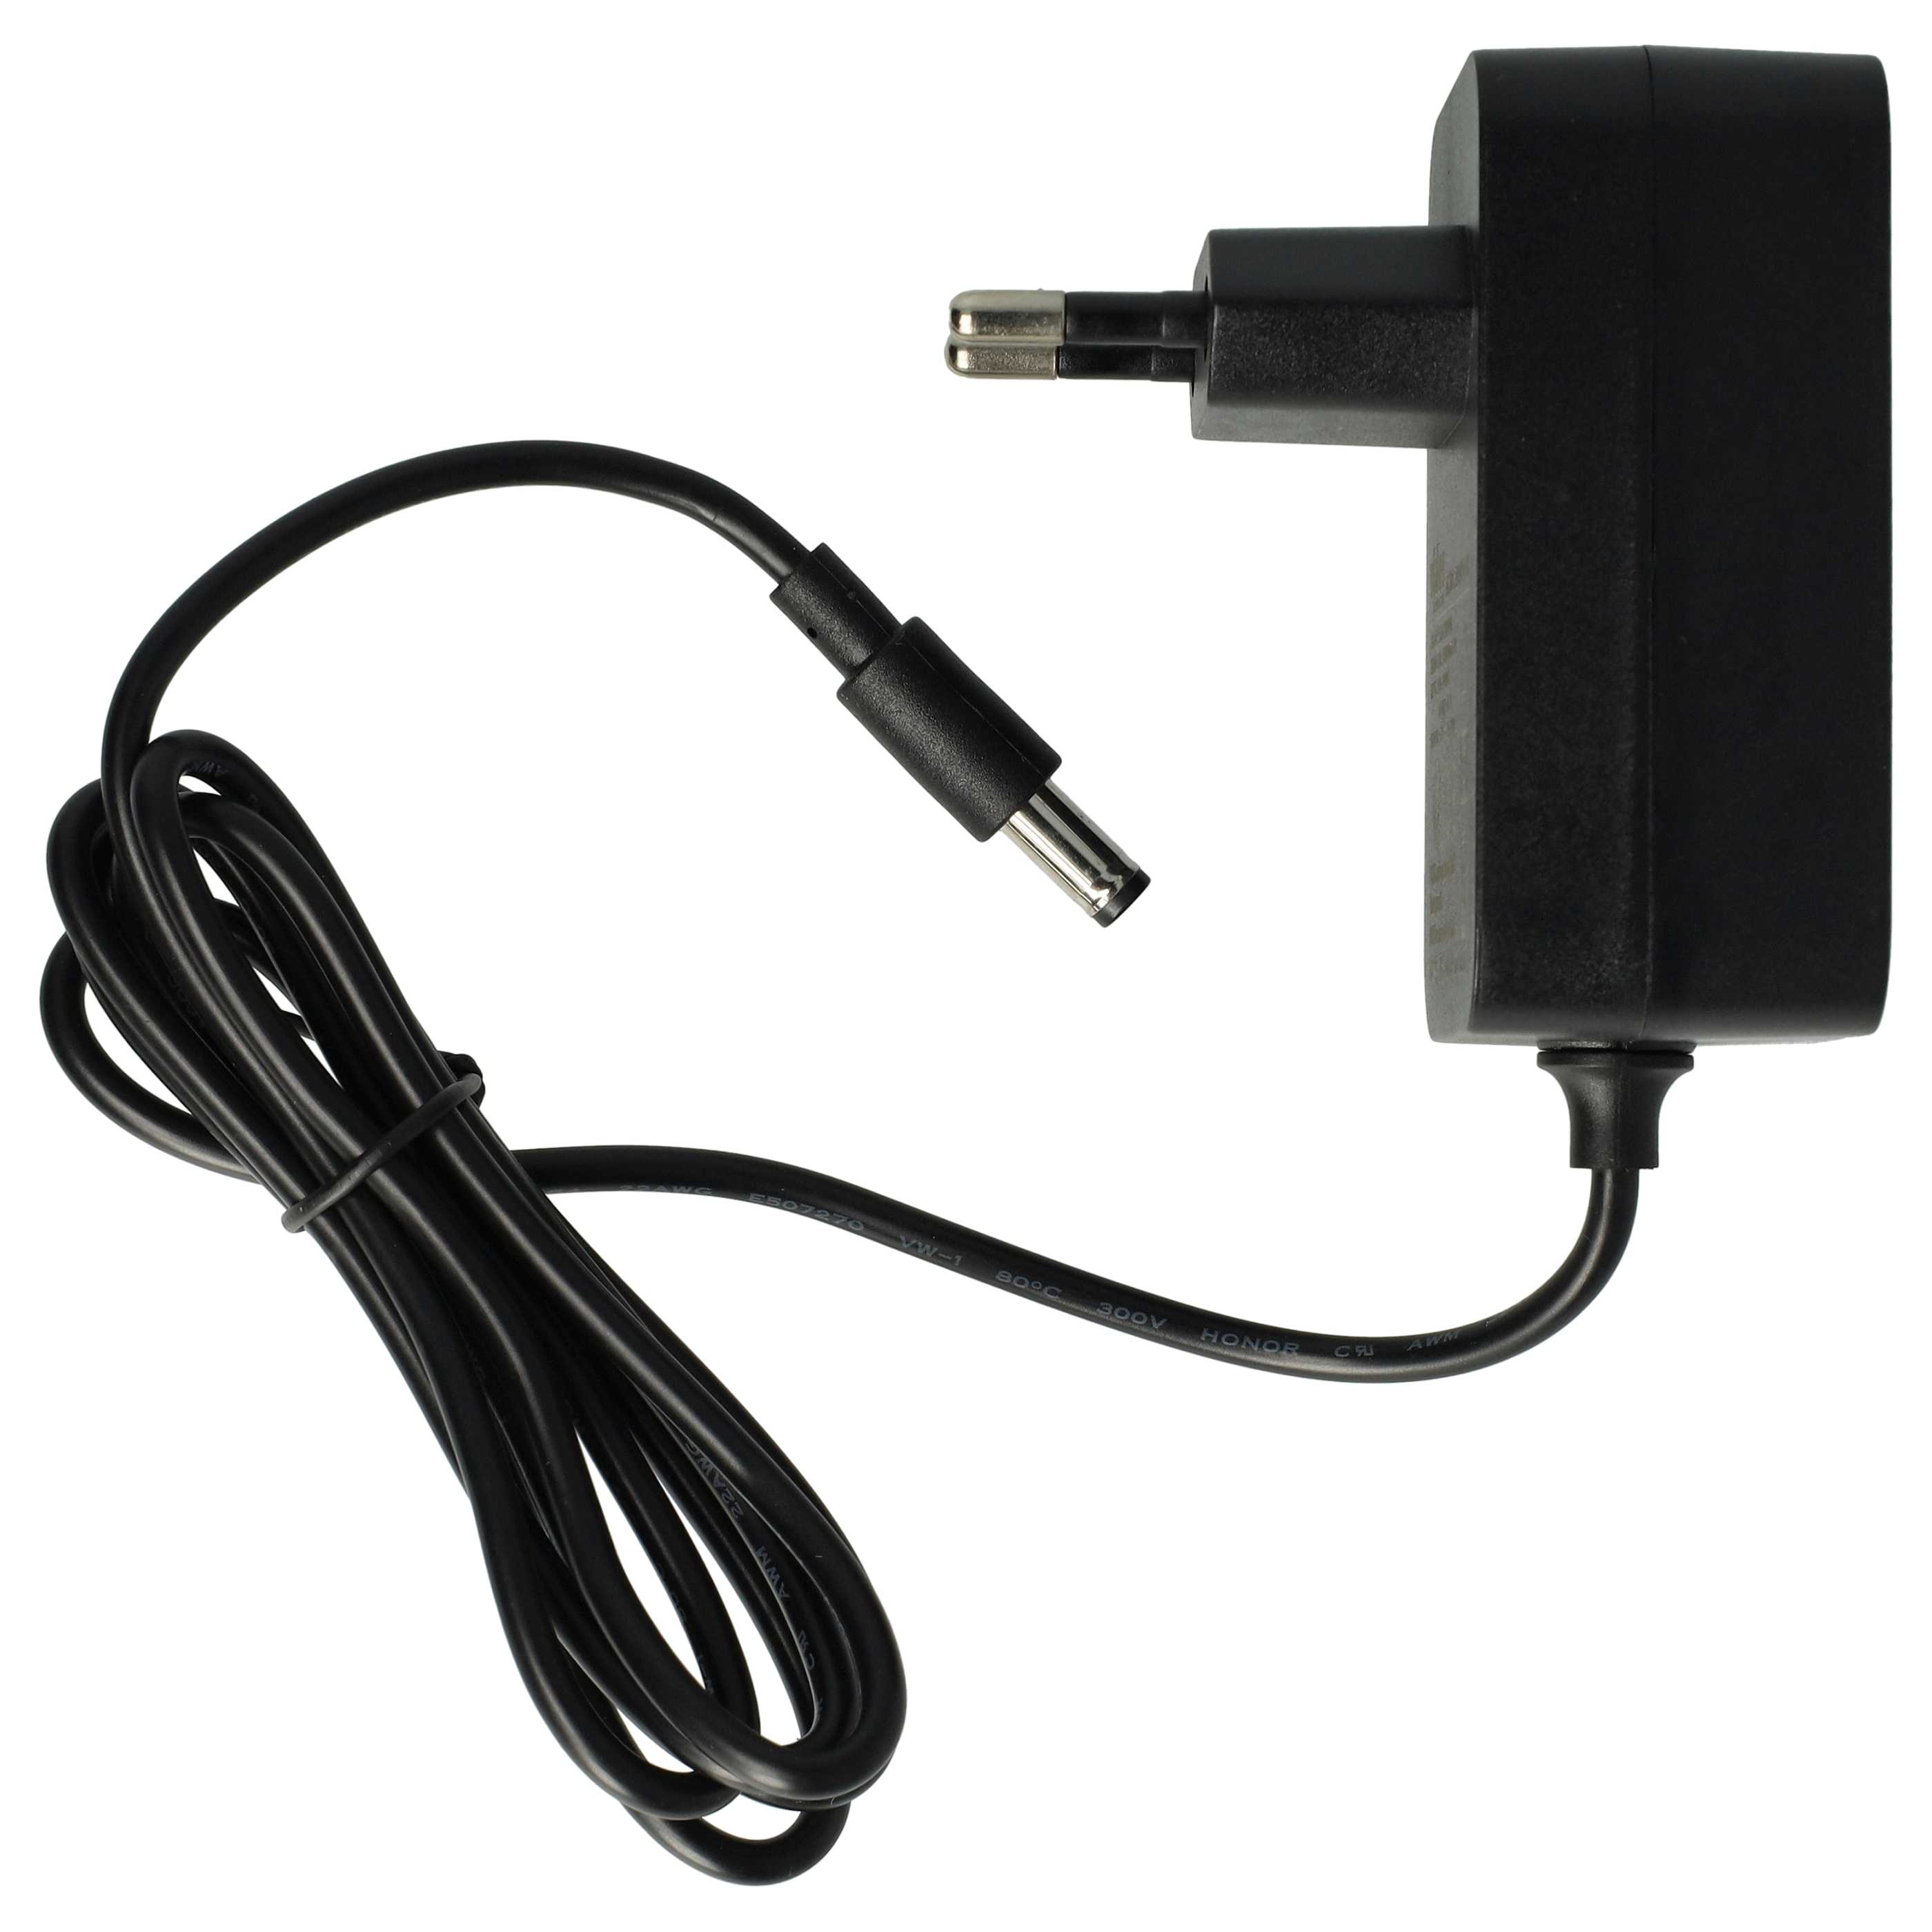 Mains Power Adapter suitable for 900TVL HD CCTV Annke Home Security Camera, Wall Mounted Security Camera etc. 